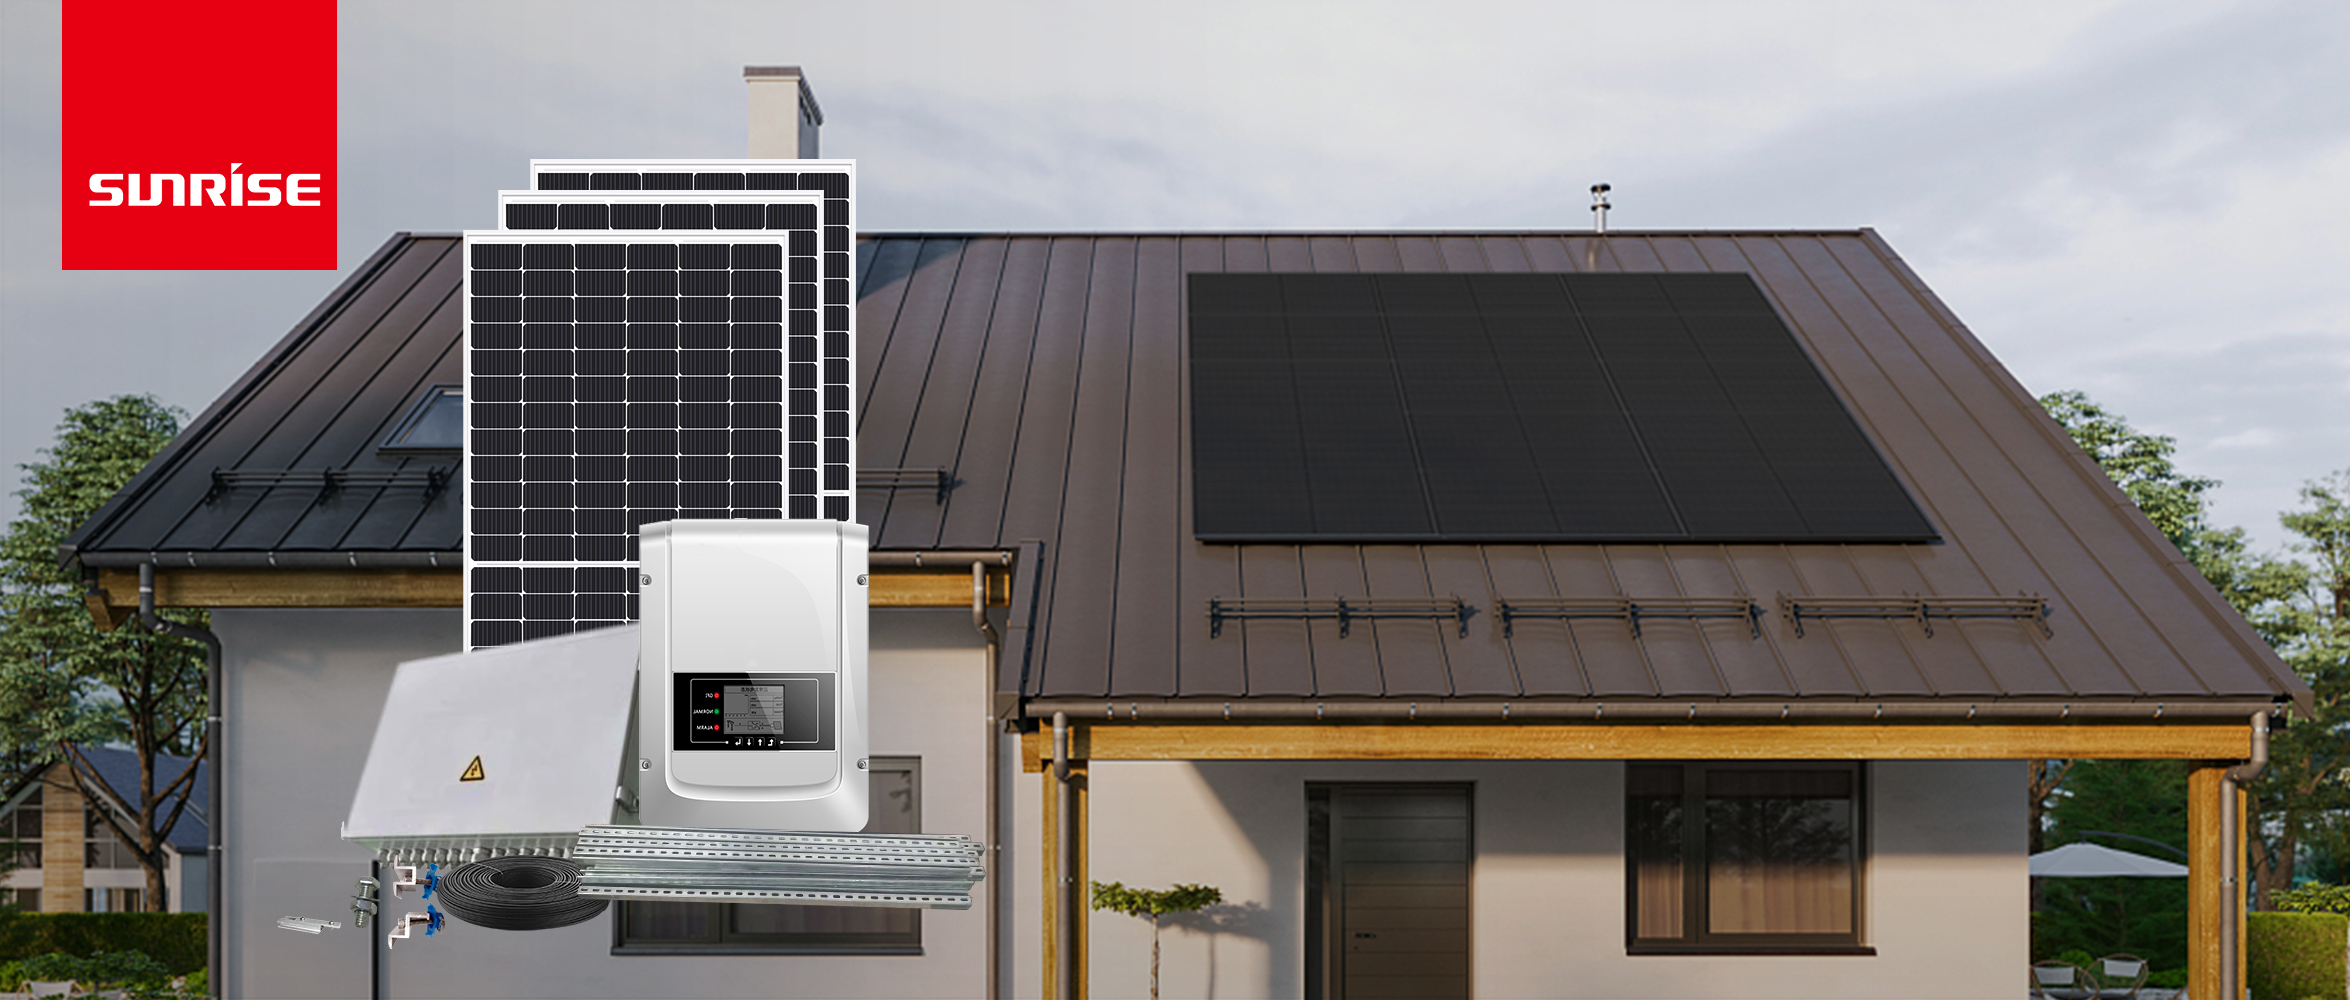 How to Choose an Inverter for a Home Photovoltaic System?